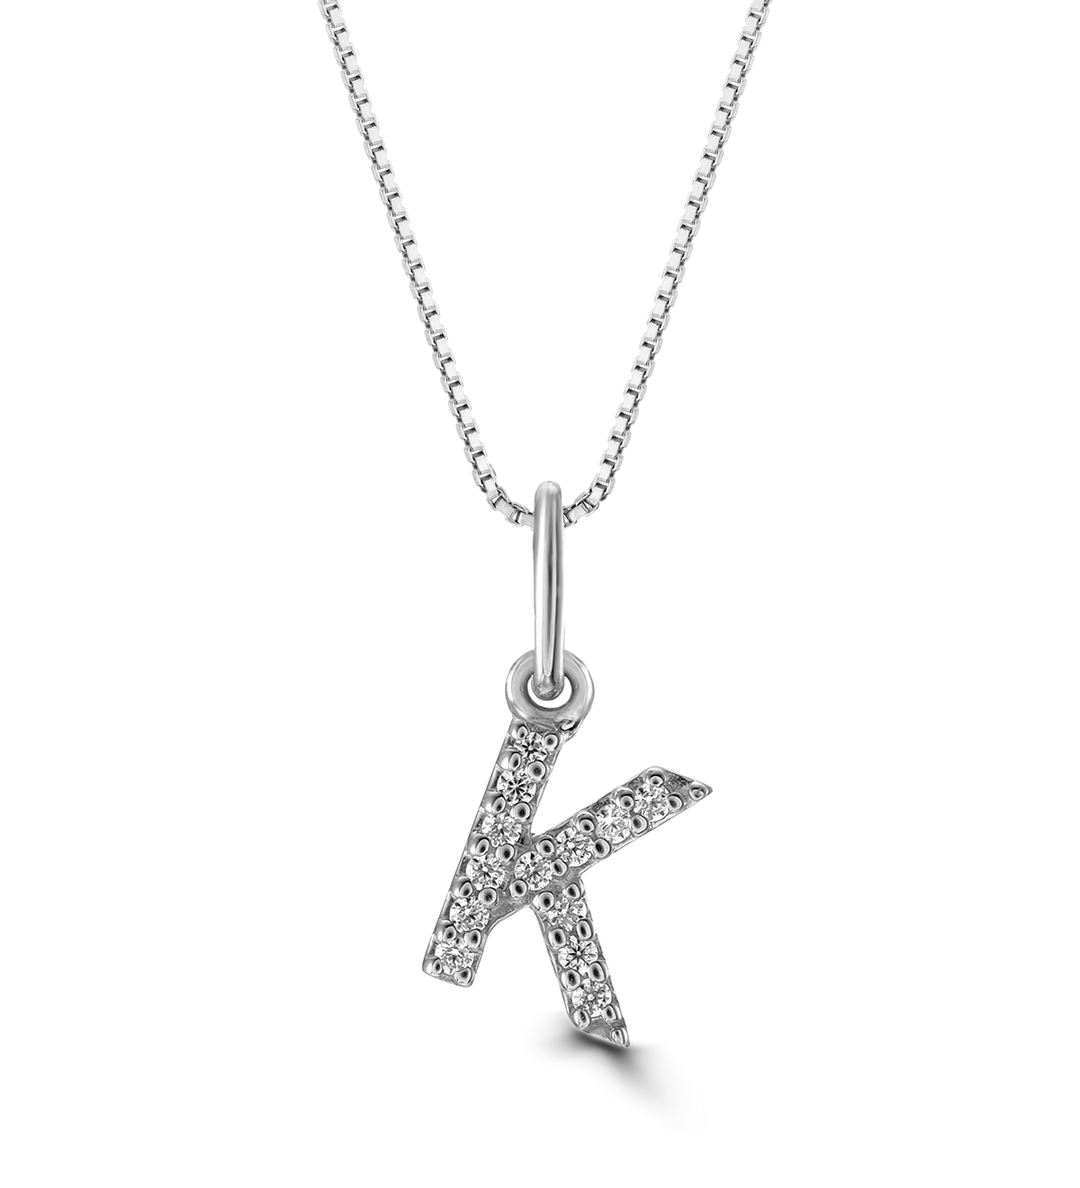 10K White Gold Diamond Initial "K" Pendant With 18" Chain